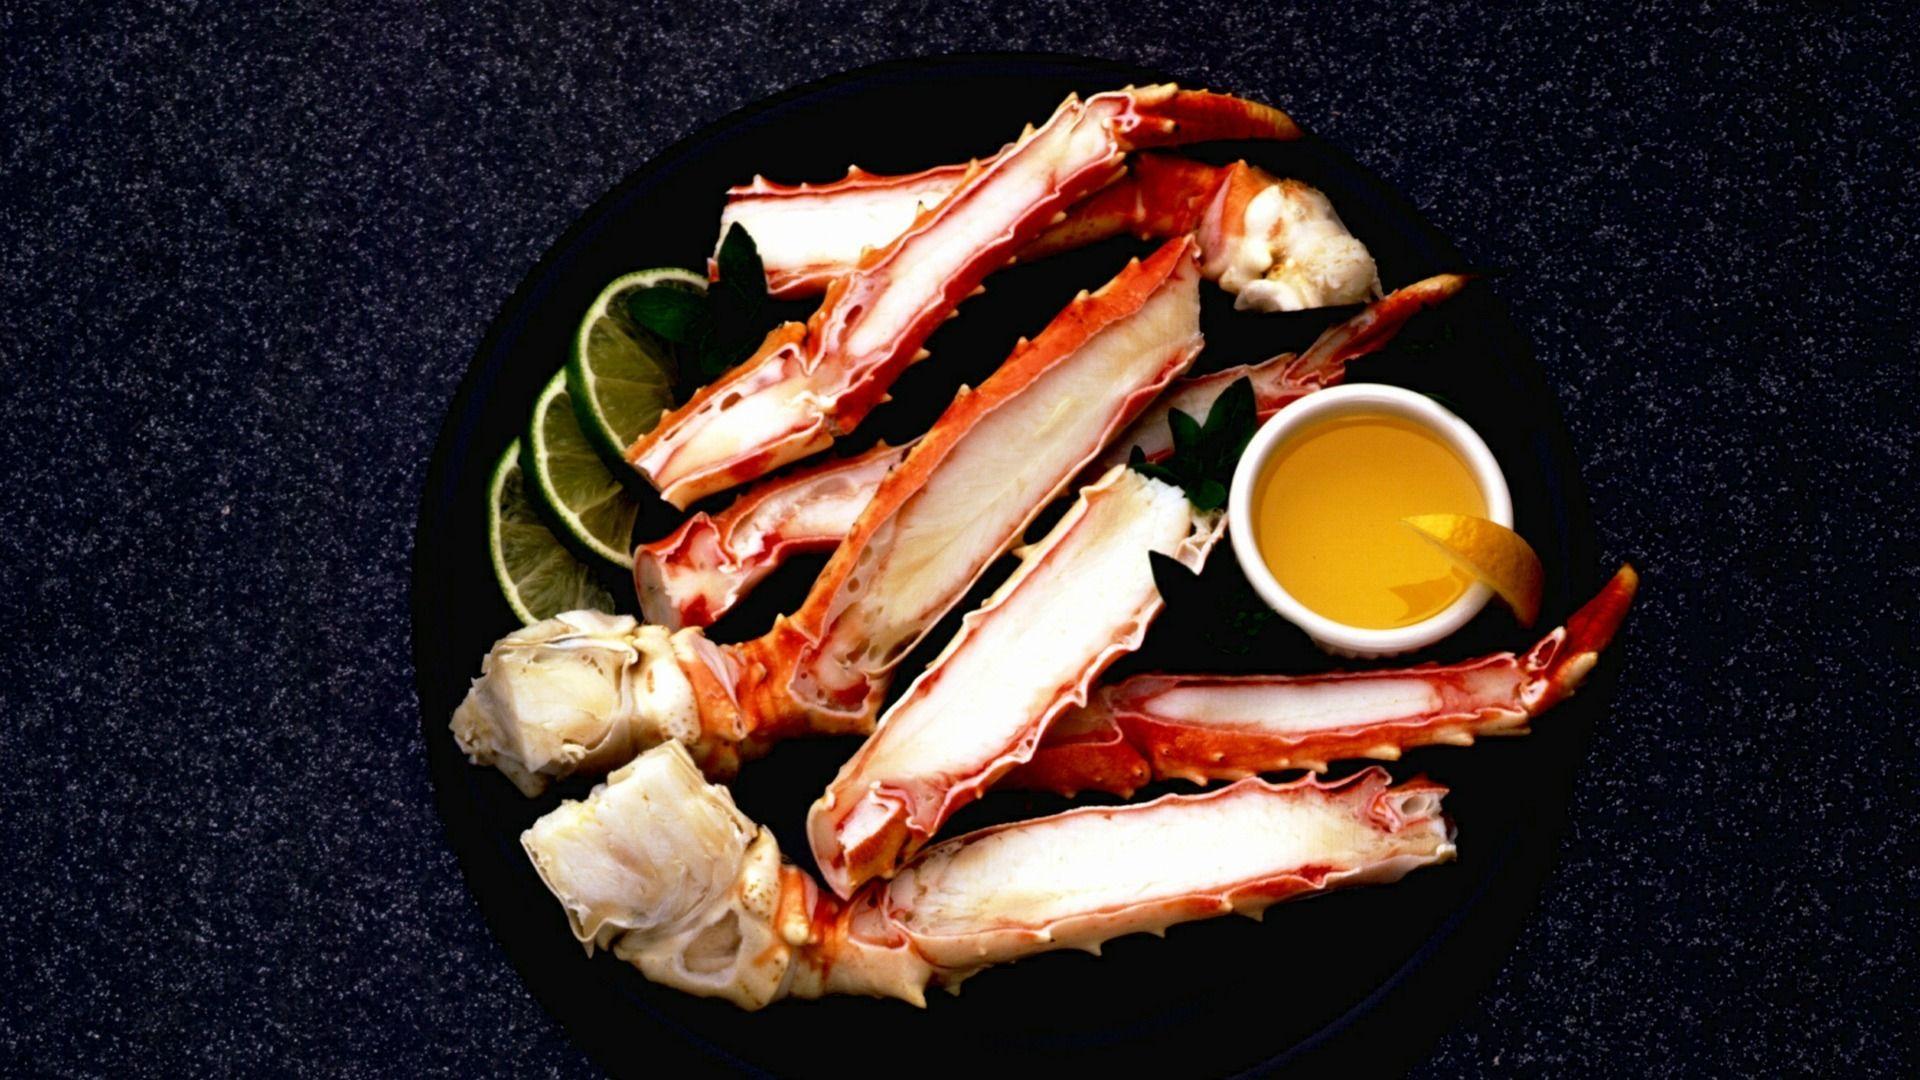 Crack open those succulent crab legs in 5 easy steps